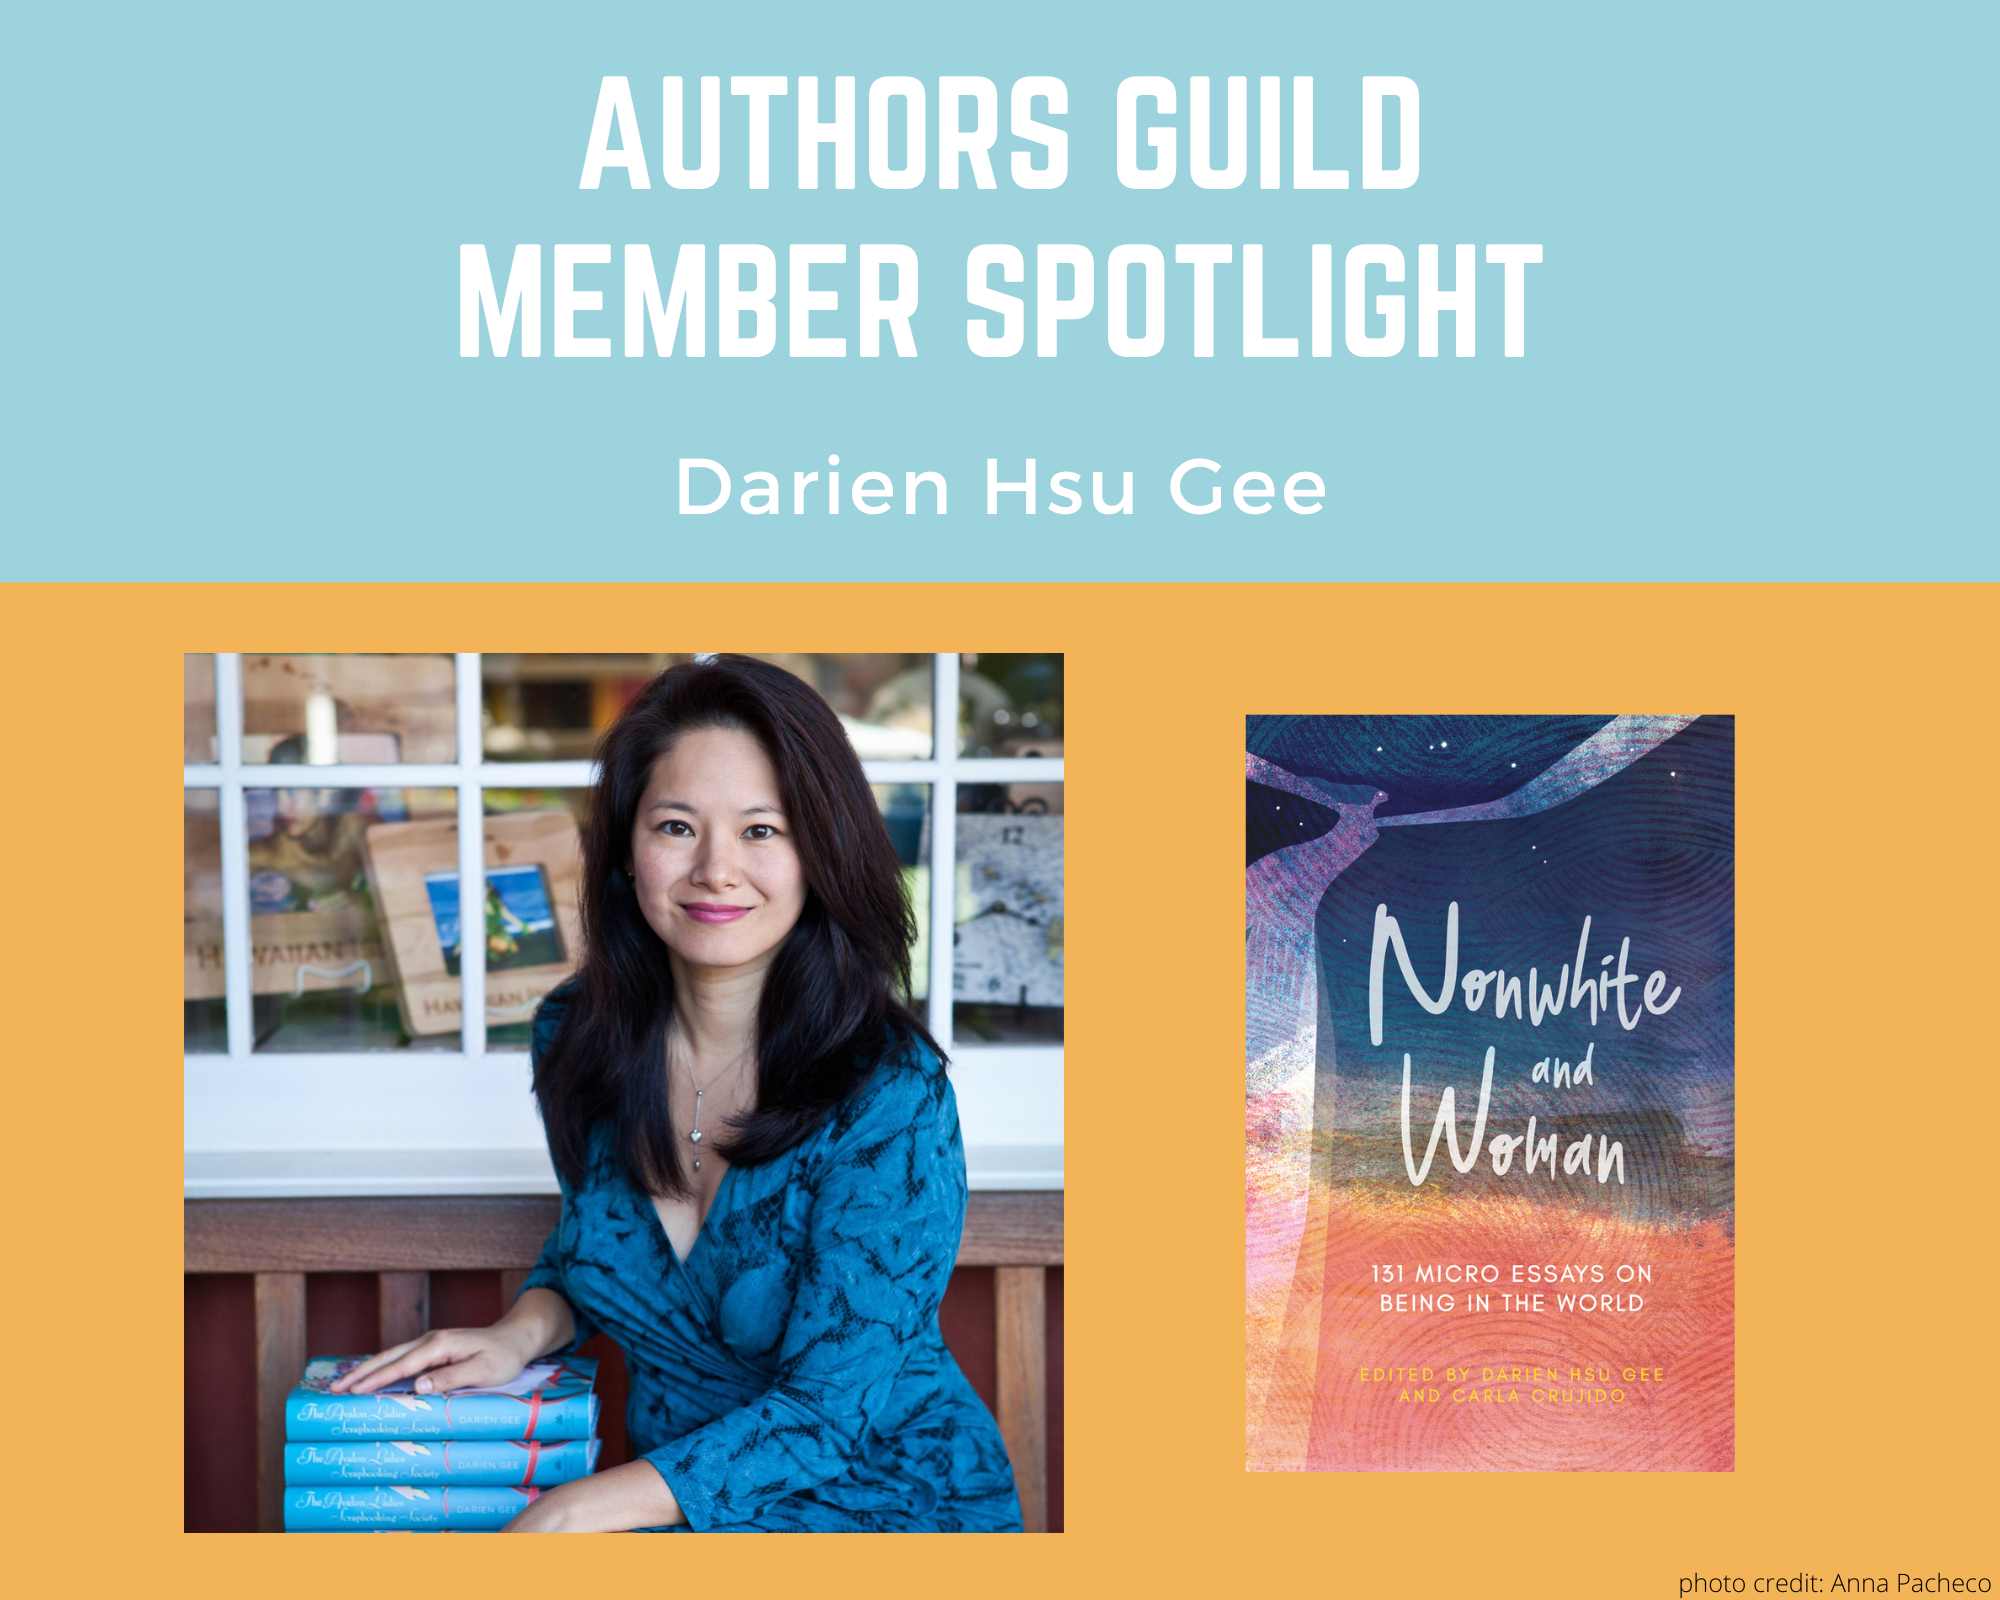 author Darien Hsu Gee sitting with a stack of books, smiling at the camera and an image of her book Nonwhite and Woman